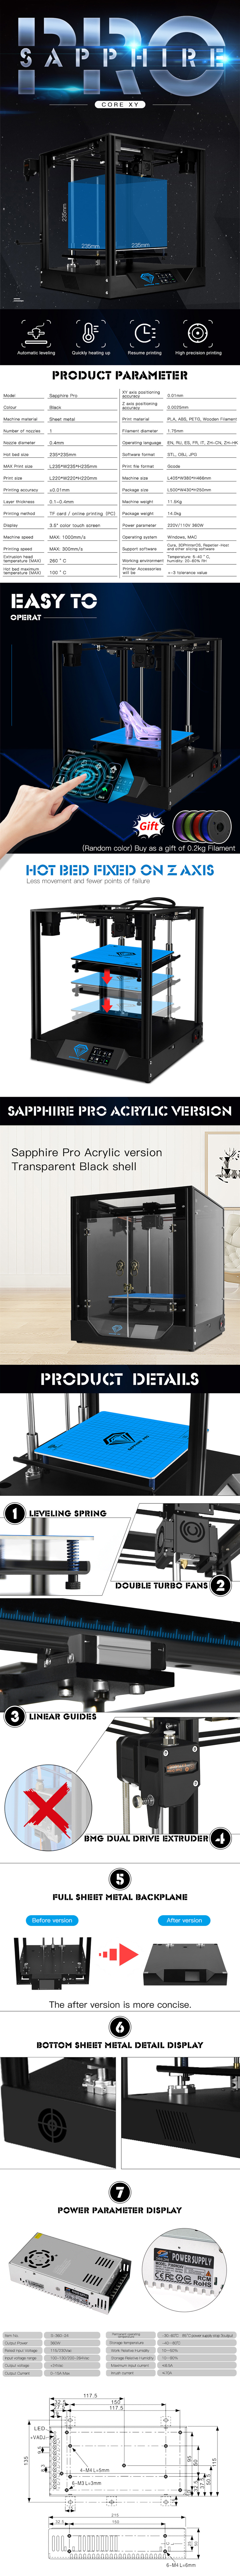 TWO TREES® Sapphire Pro CoreXY DIY 3D Printer Kit 235*235*235mm Printing Size With Upgraded Acrylic Shell 49